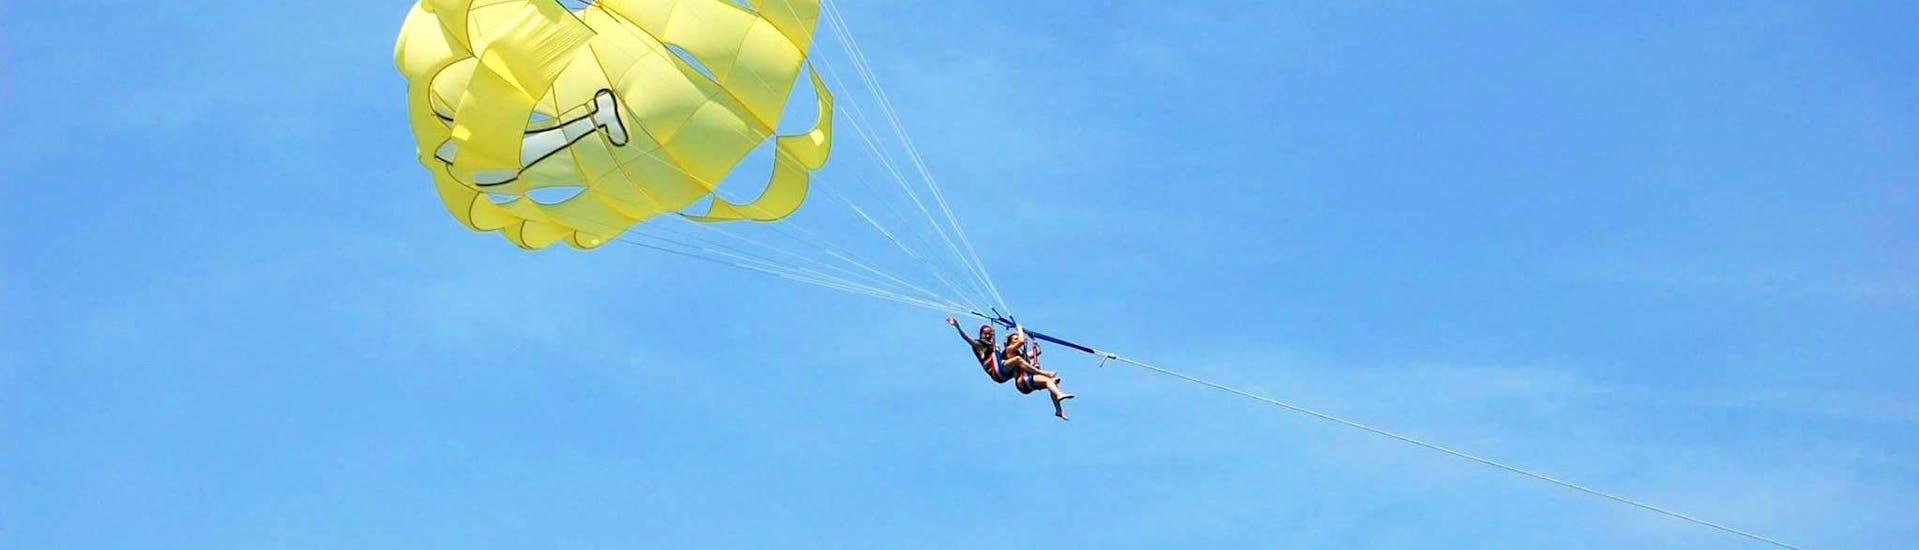 Friends are having fun while Parasailing in Cagnes-sur-Mer with Plage des Marines.